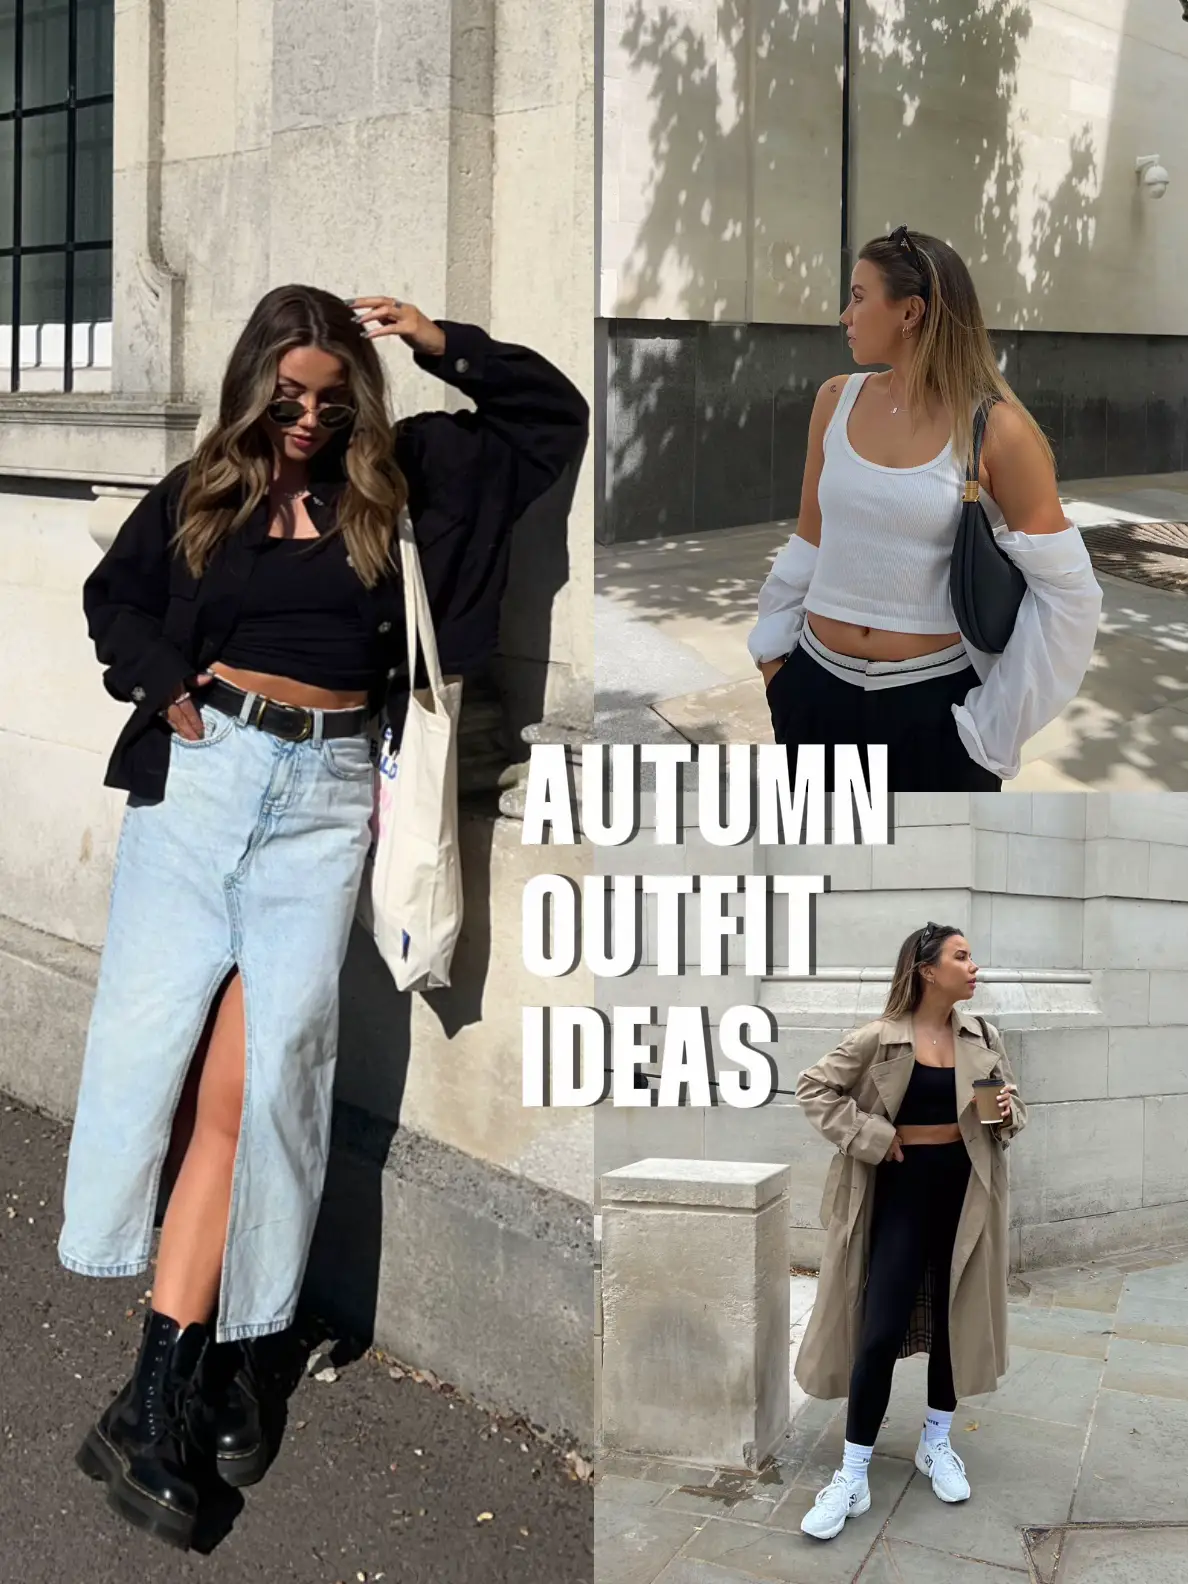 Autumn Outfit Ideas (For Minimal Girlies), Gallery posted by Jess Sheppard